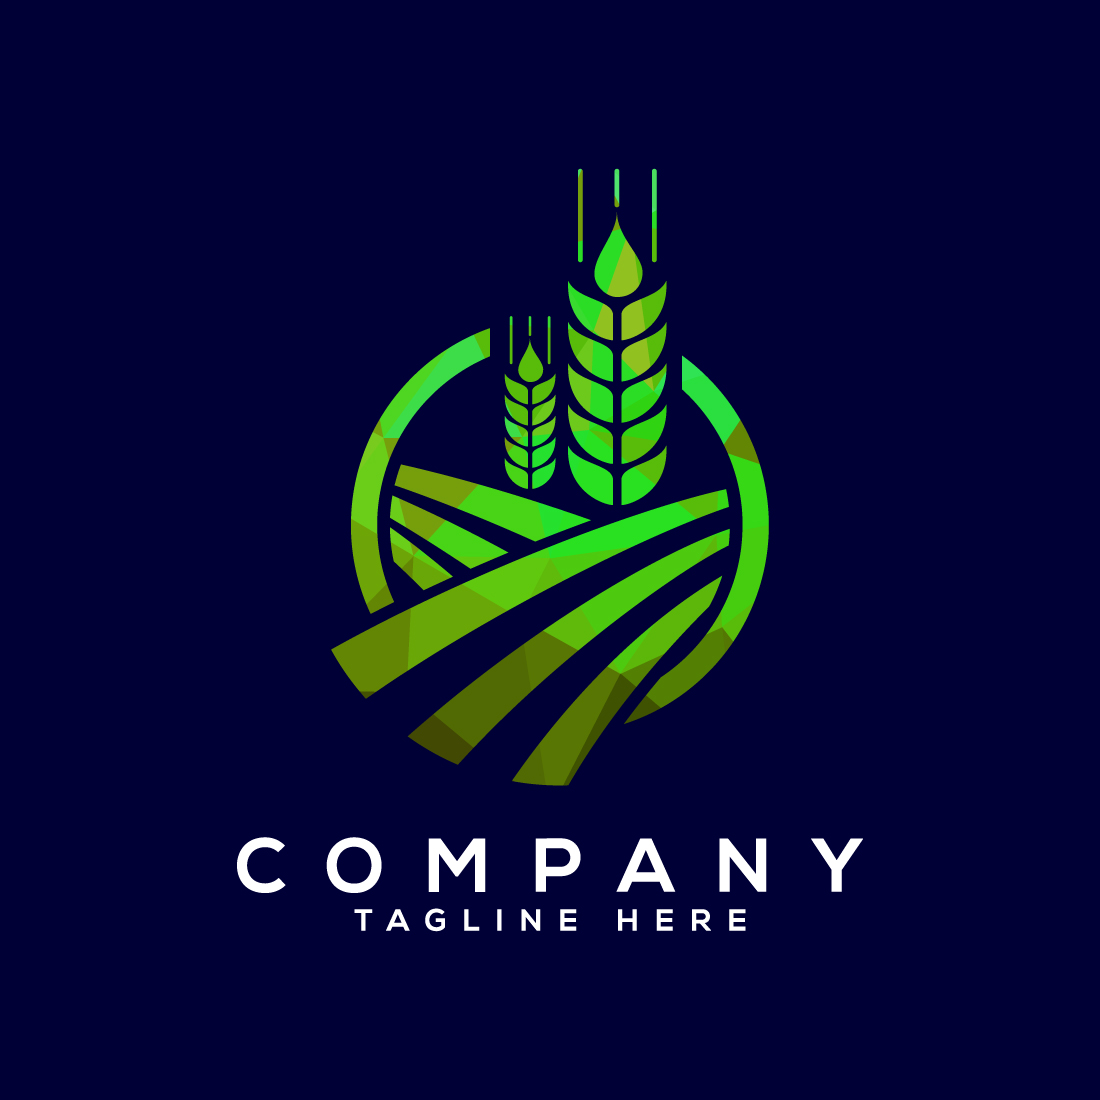 Wheat And Field Low Poly Style Icon and Logo For Identity Style of Natural Product Company and Farm Company cover image.